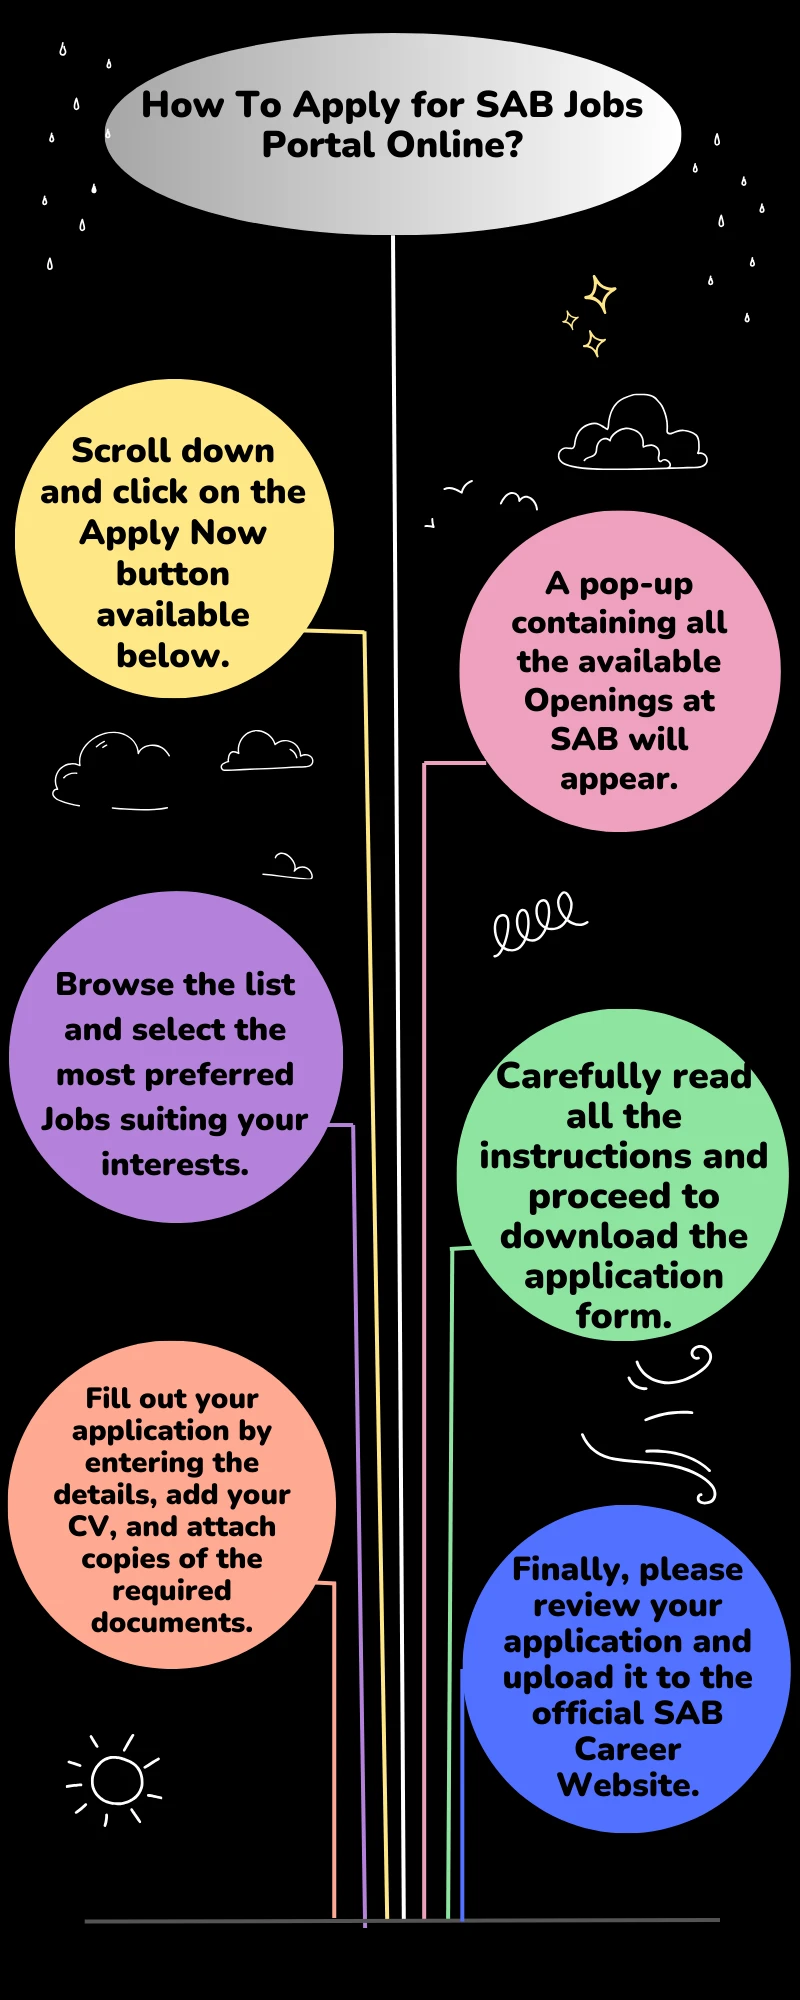 How To Apply for SAB Jobs Portal Online?